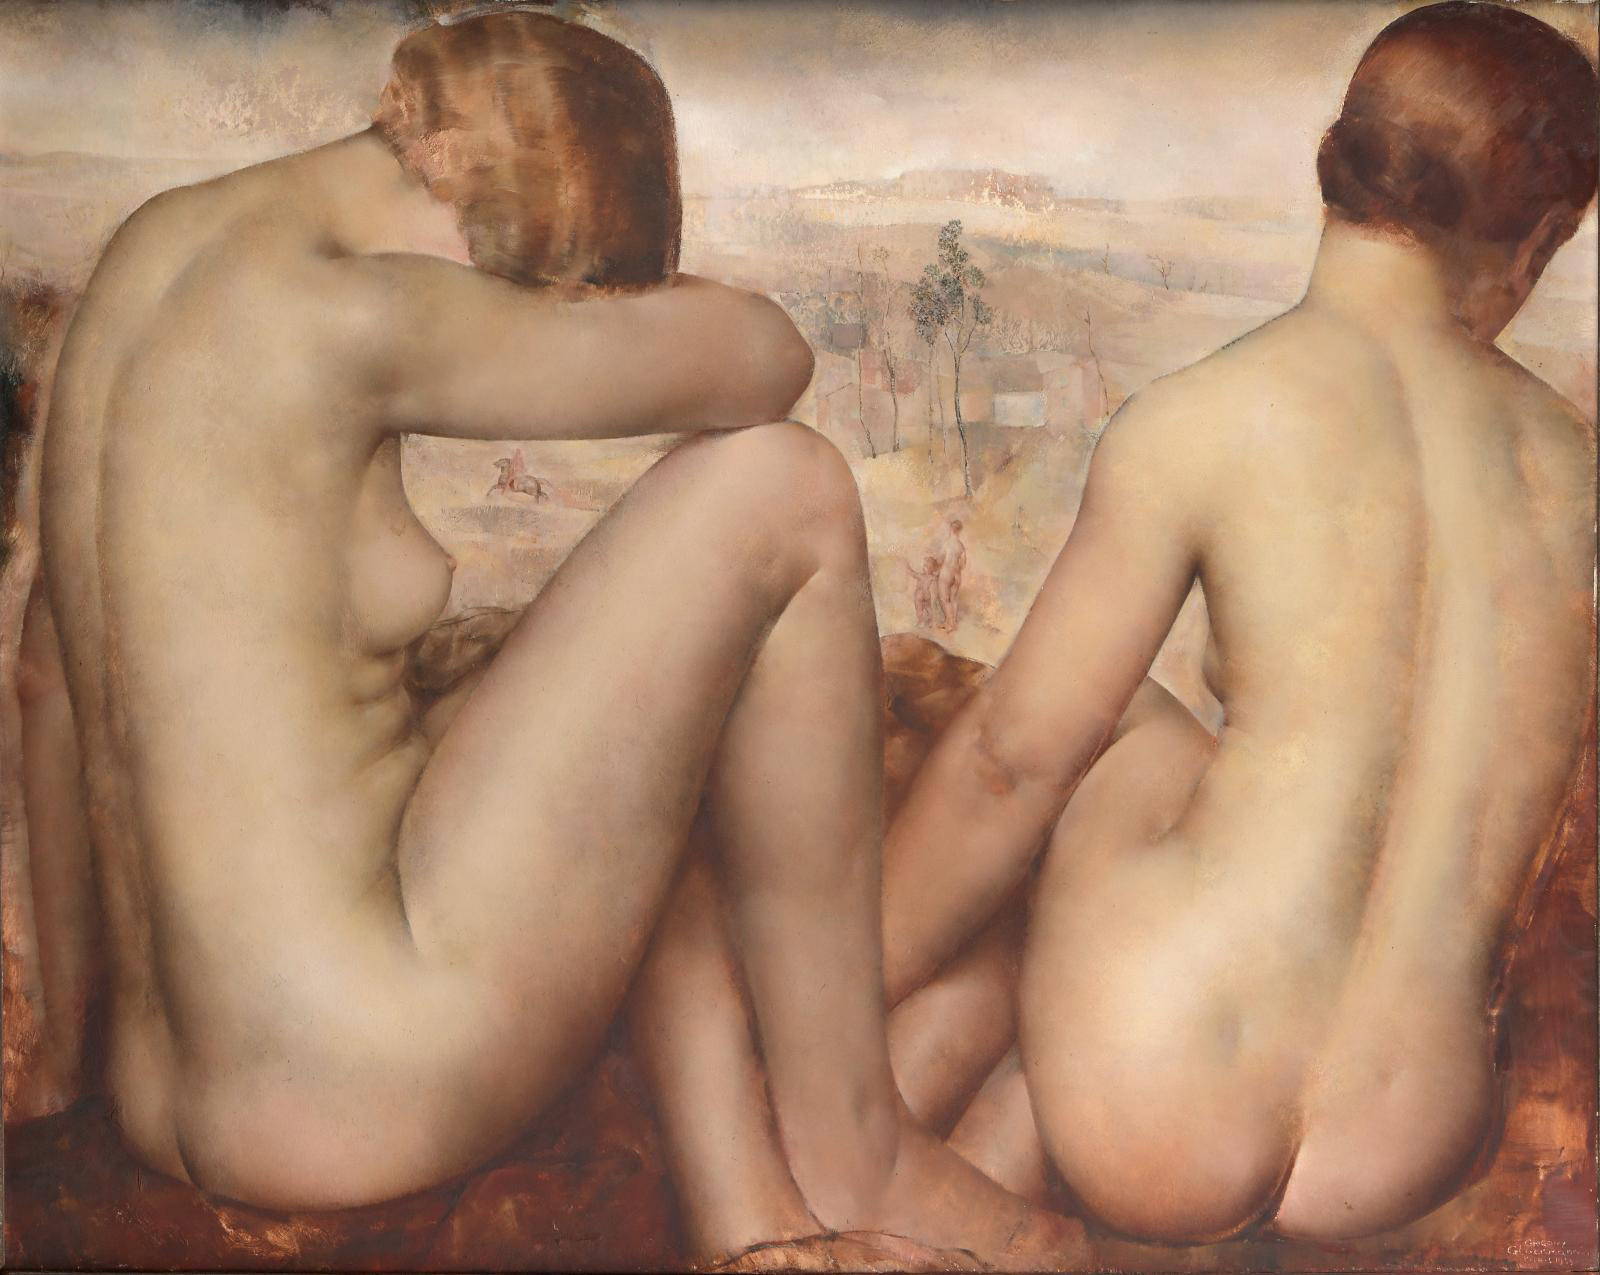 Two Grigory Gluckmann Nudes Harking Back to the Sources of Classicism